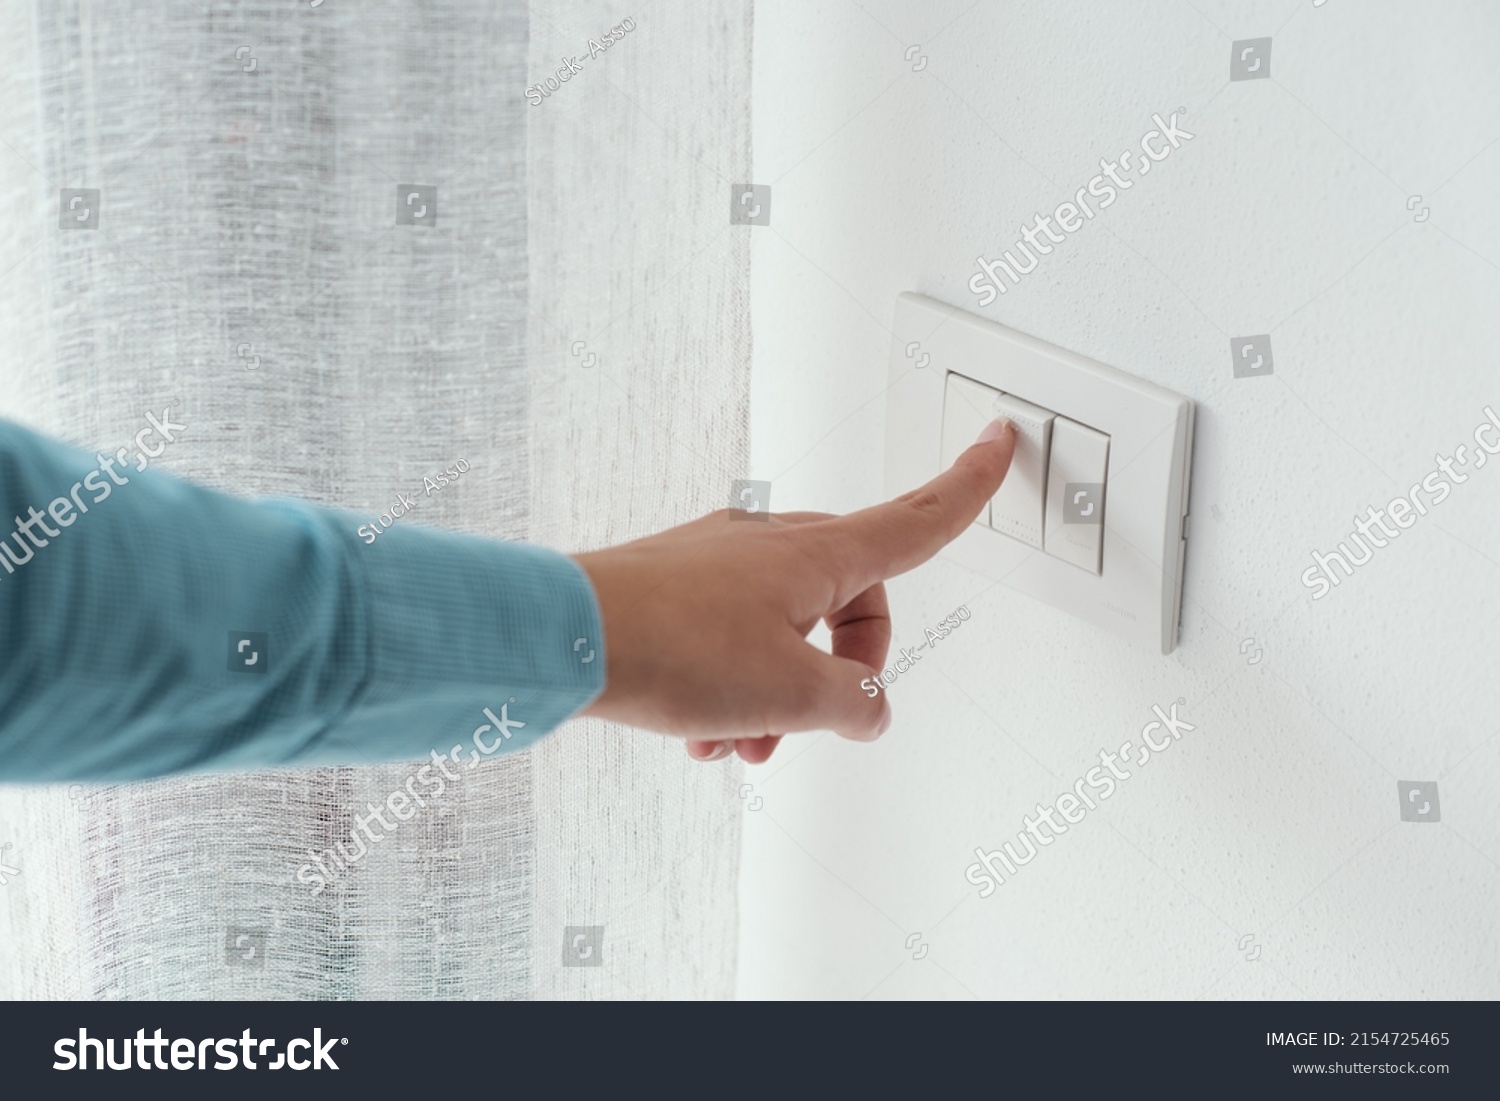 Woman pressing a light switch, energy saving concept #2154725465